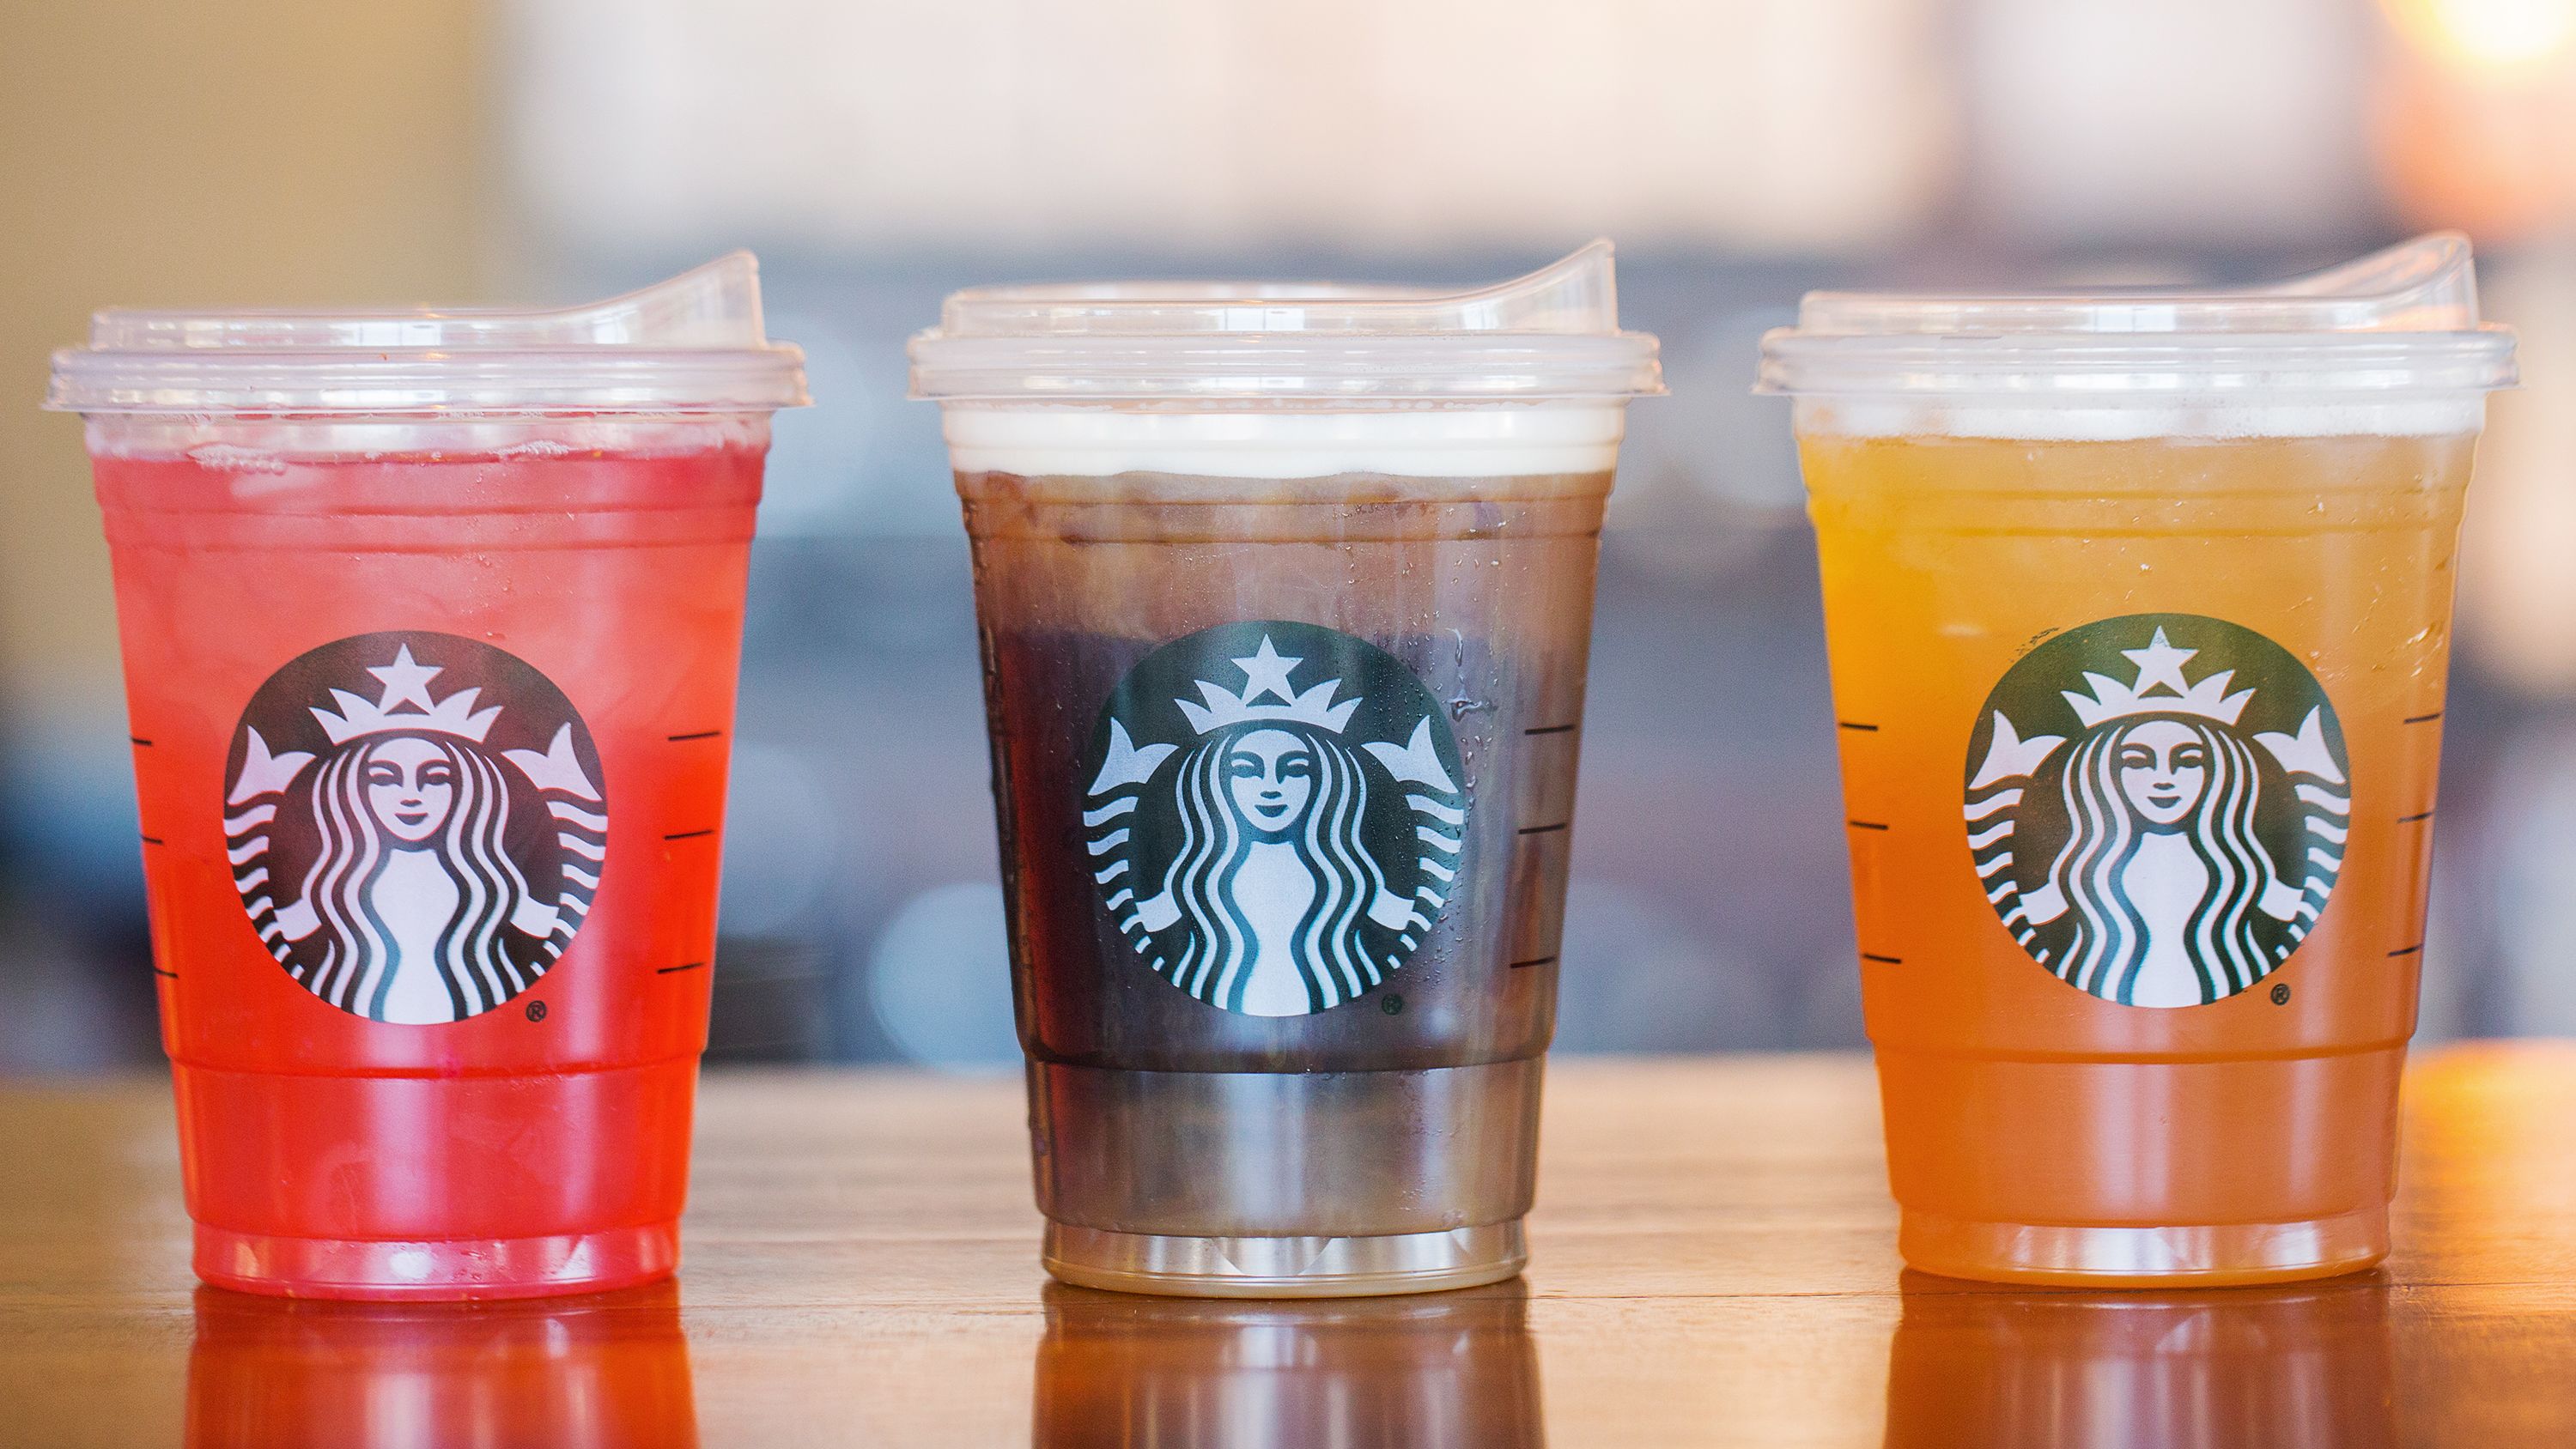 Disability rights groups voice issues with Starbucks' plastic straw ban as  company responds